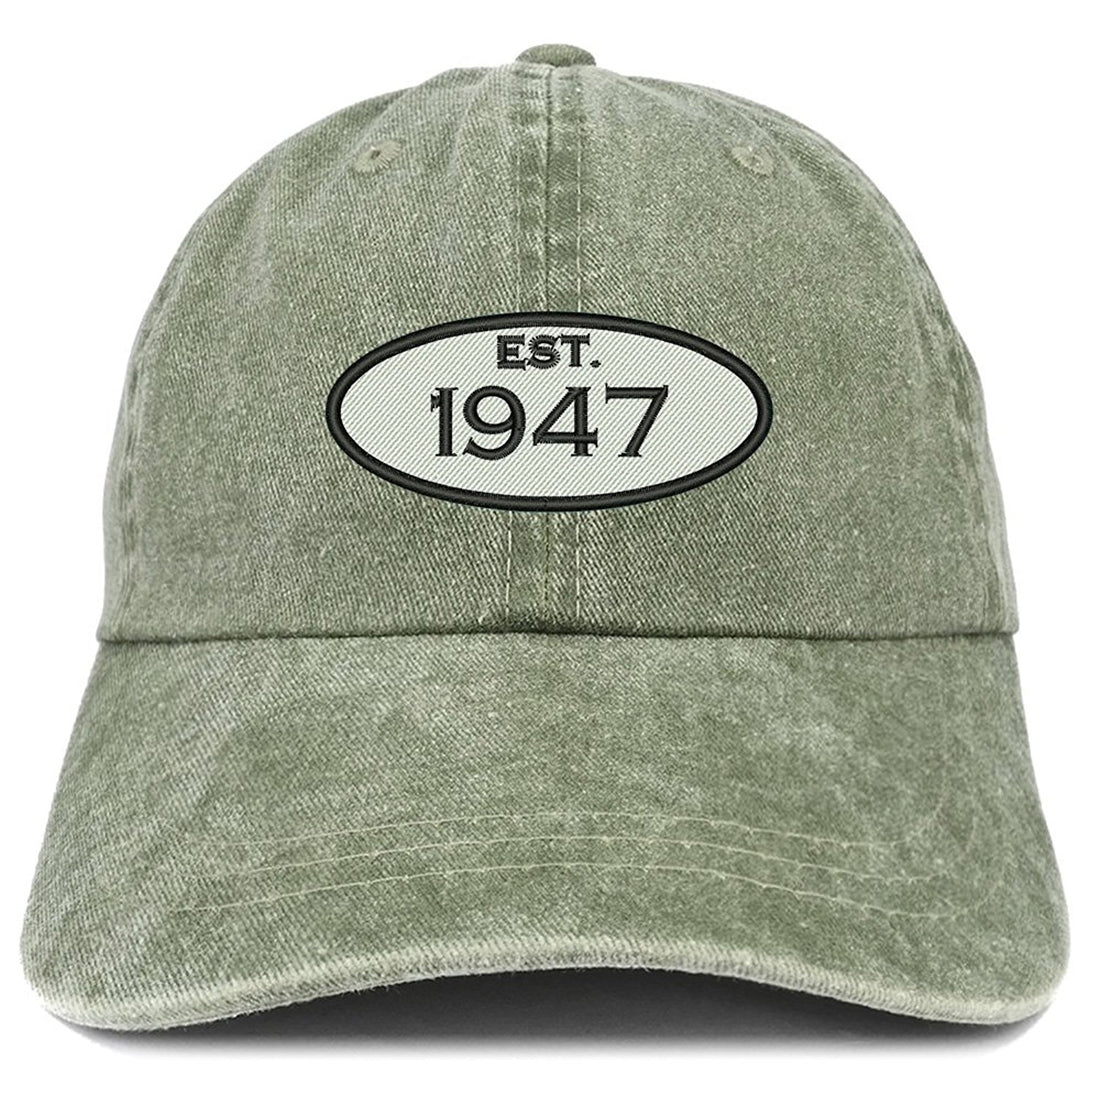 Trendy Apparel Shop Established 1947 Embroidered 72nd Birthday Gift Pigment Dyed Washed Cotton Cap